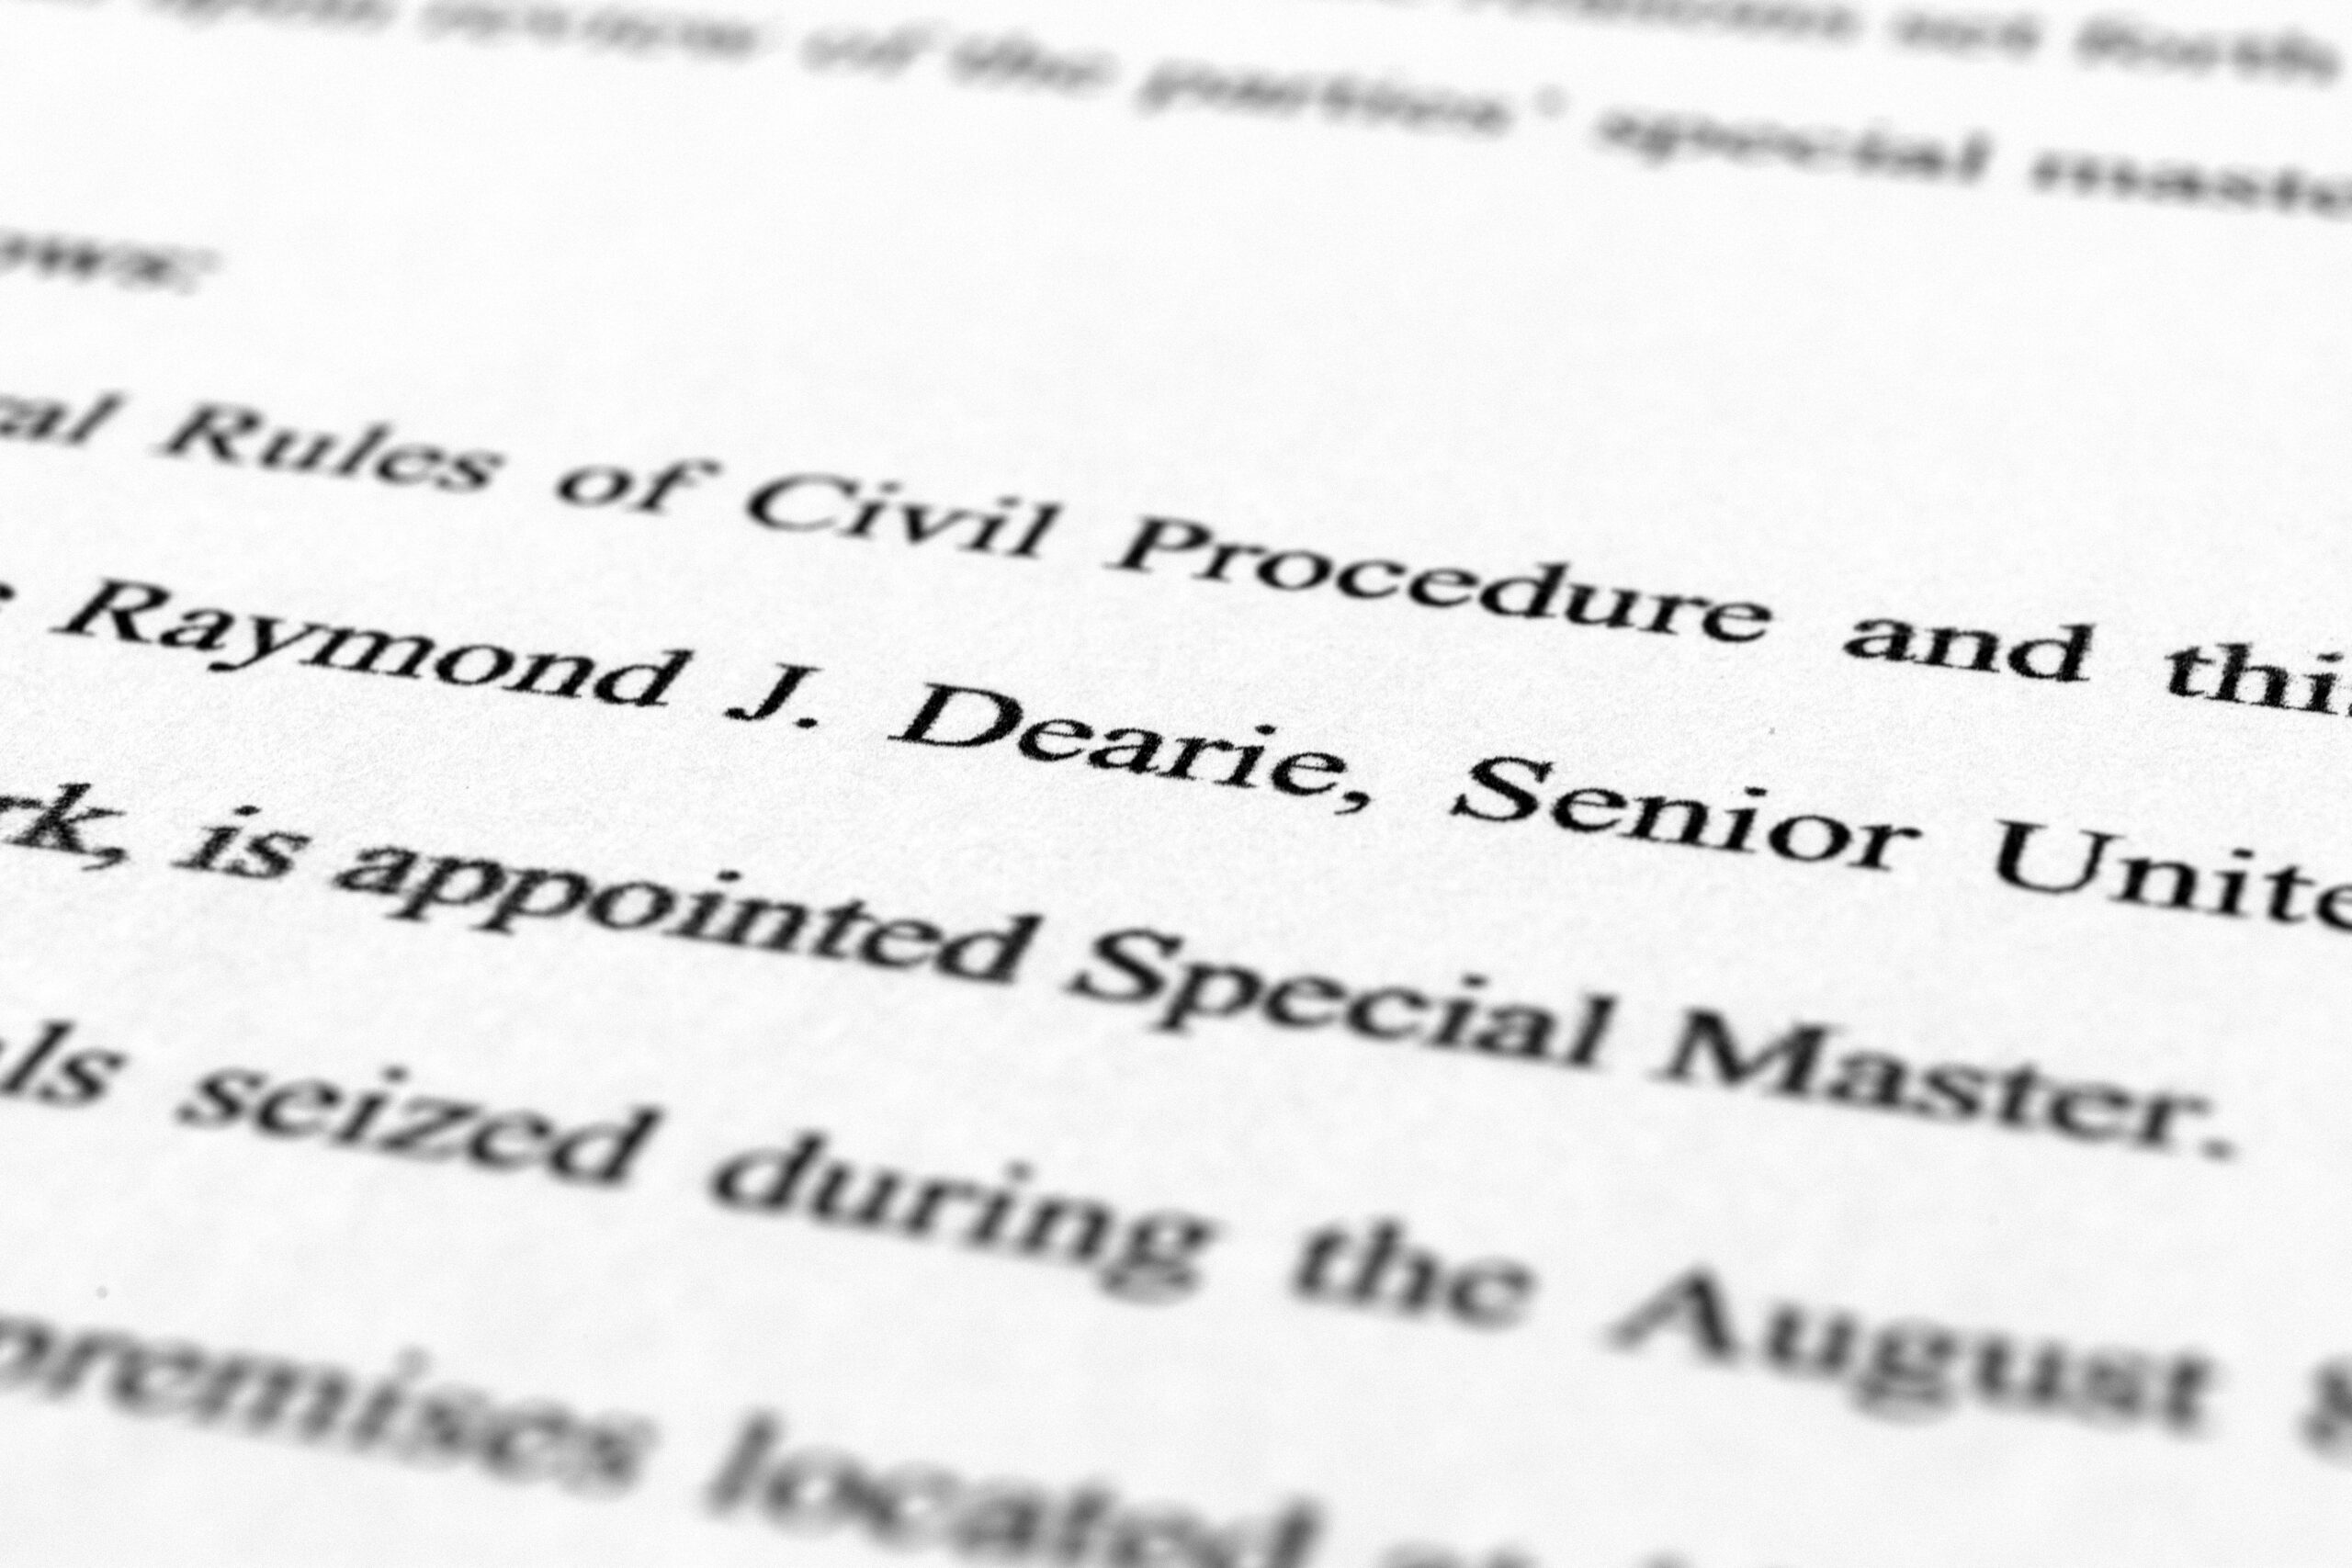 A page from the order by U.S. District Judge Aileen Cannon naming Raymond Dearie as special master to serve as an independent arbiter and to review records seized during the FBI search of former President Donald Trump's Mar-a-Lago estate, is photographed Thursday, Sept. 15, 2022. (AP Photo/Jon Elswick)